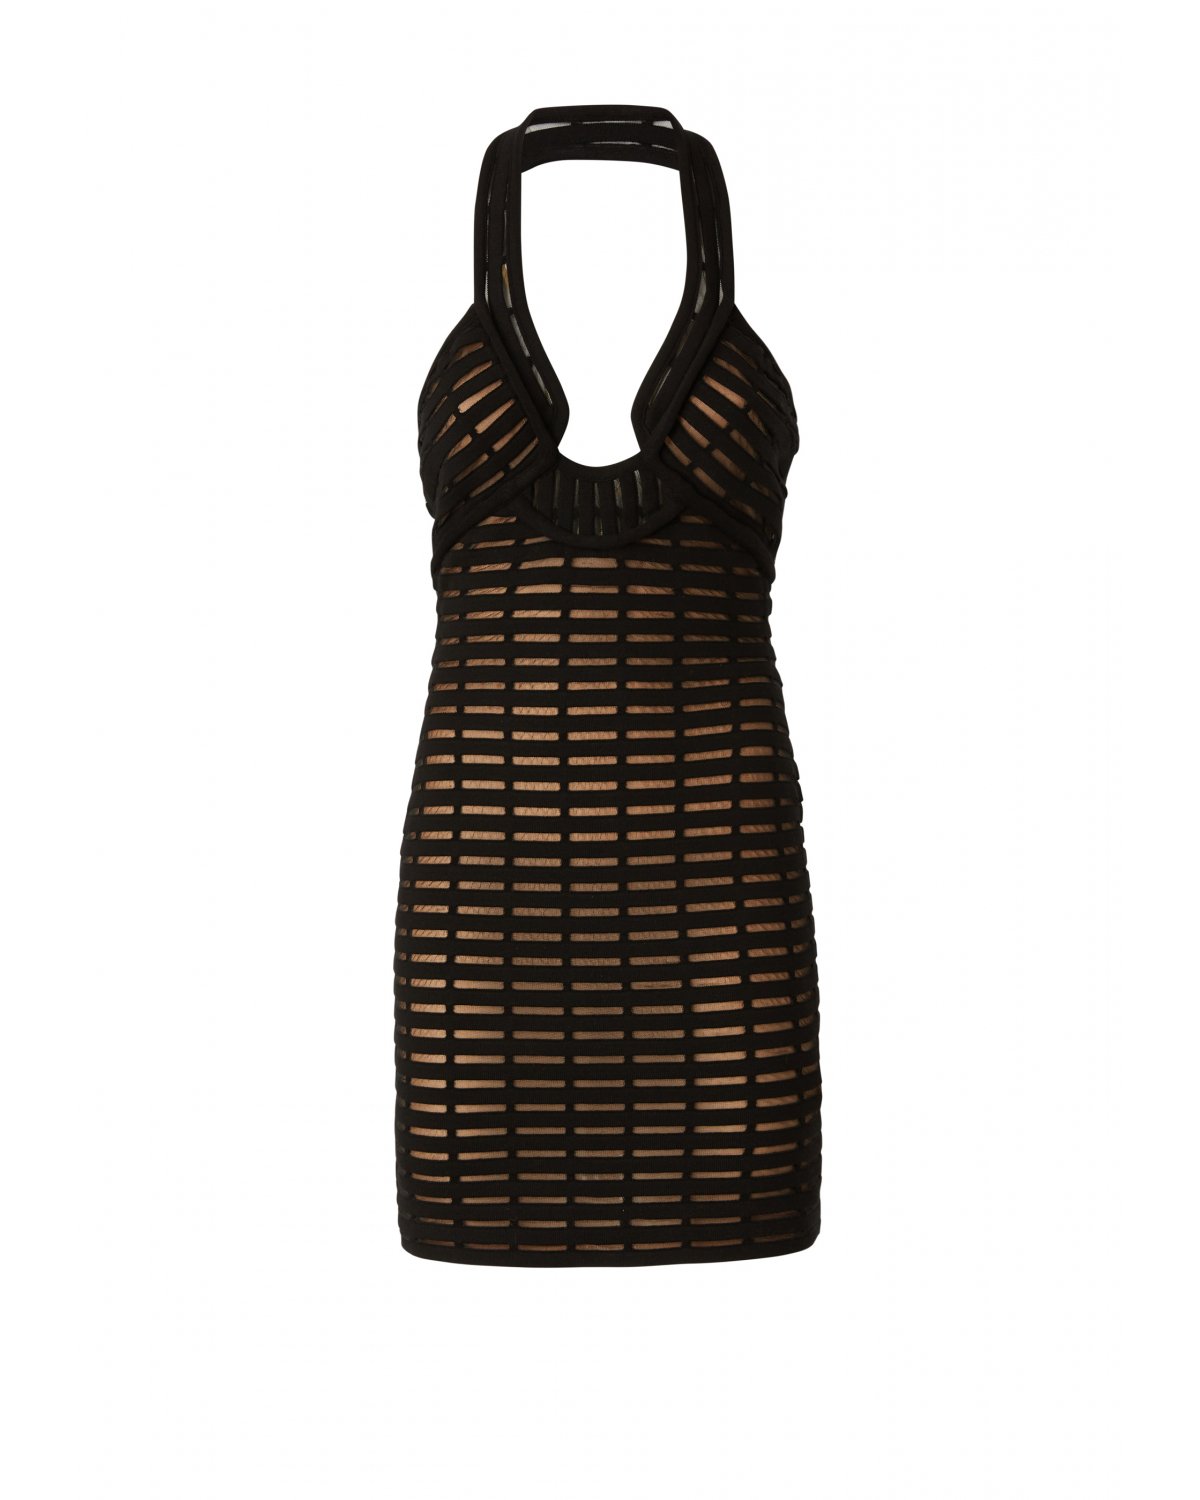 Black iconic dress with halter neckline | Iconic Capsule Collection, 73_74 | Genny